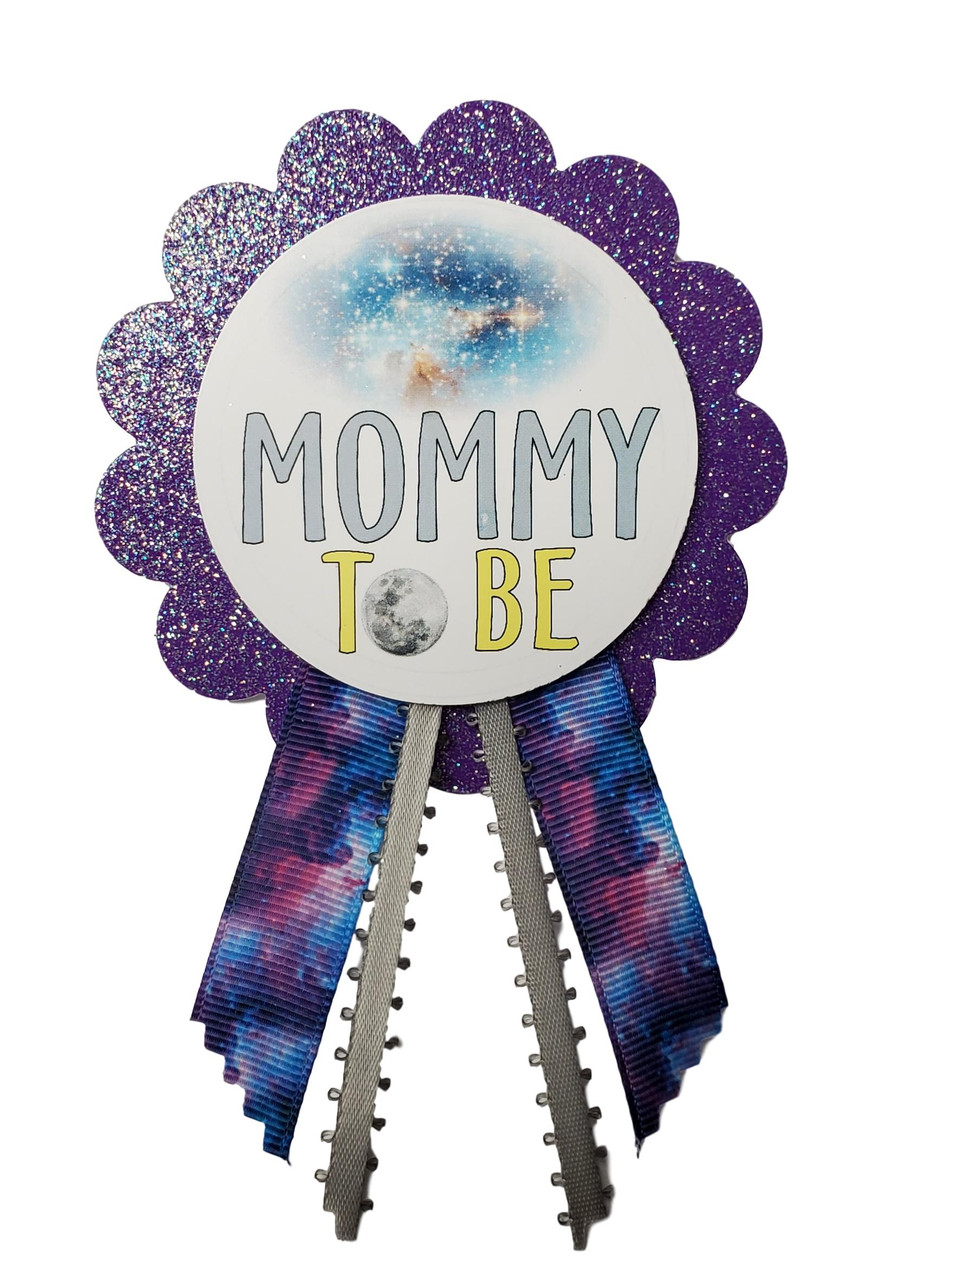 Mommy To Be Pin | Blue Mom To Be Button | Baby Shower Ribbon For New Mom |  Nautical Baby Shower Pins | Pregnant Mom Keepsake Gift | Made In USA | 7